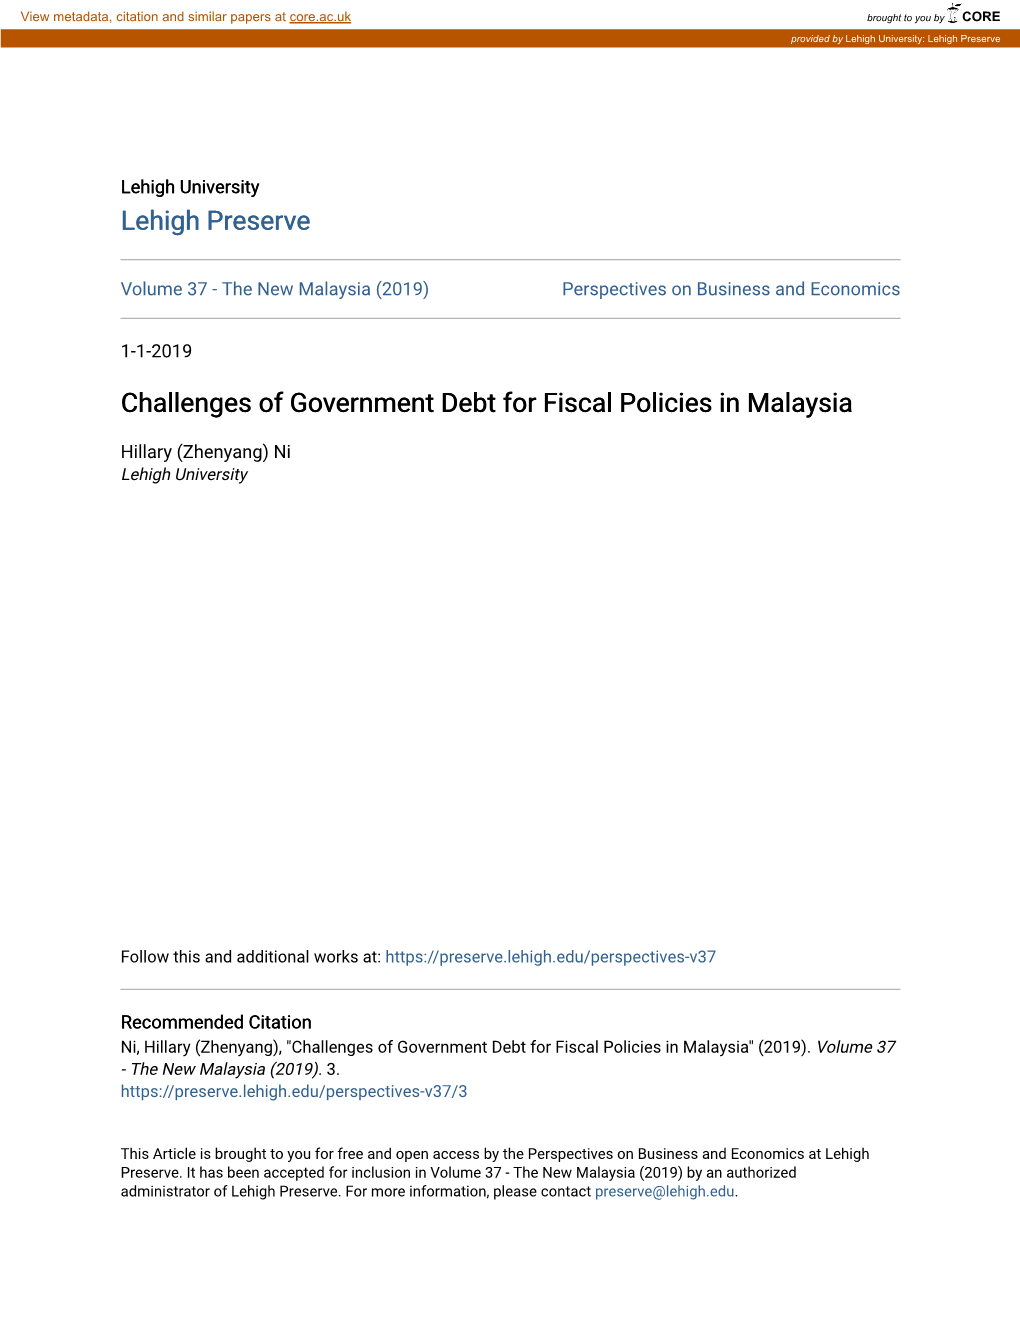 Challenges of Government Debt for Fiscal Policies in Malaysia